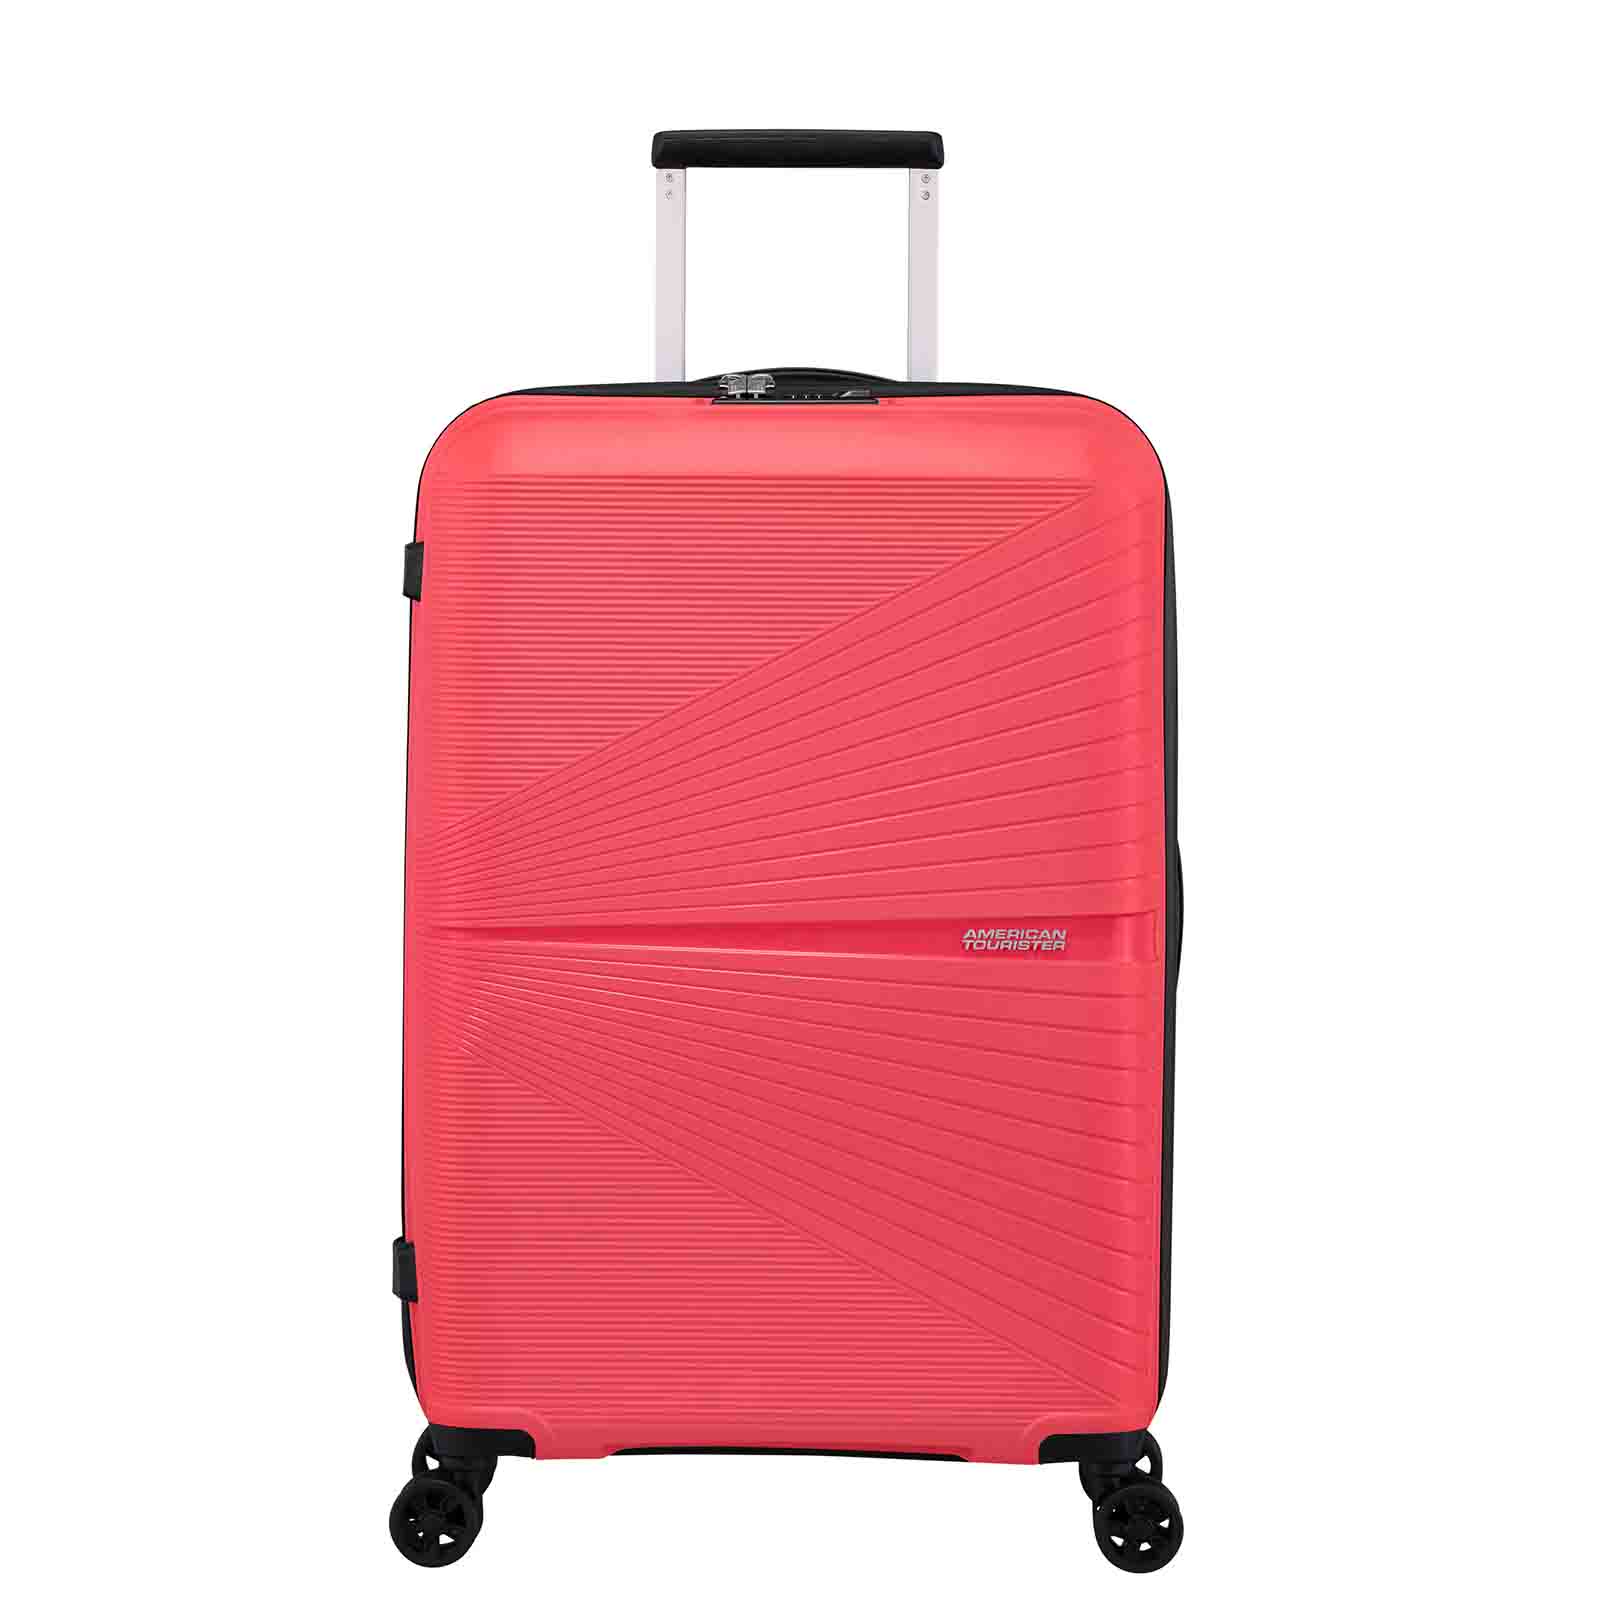 American-Tourister-Airconic-67cm-Suitcase-Paradise-Pink-Front